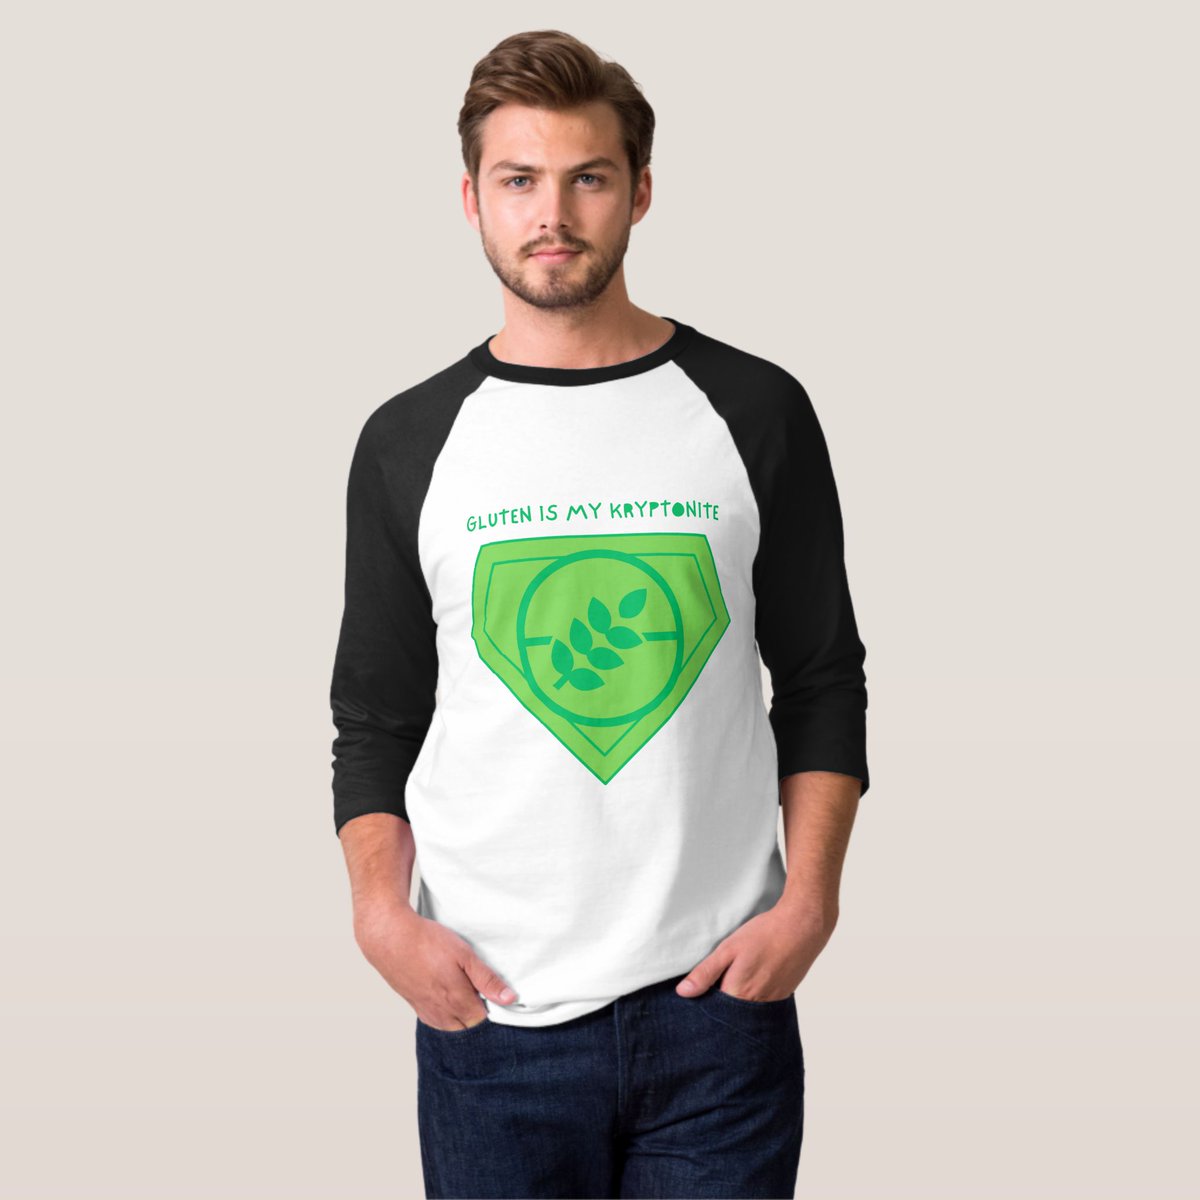 'Gluten is my Kryptonite' - a comfortable, casual and loose fitting t-shirt that will easily become a closet staple. Made from 100% cotton, it's unisex and wears well on anyone and everyone! Get yours: zazzle.com/z/8cjr5oqd?rf=… #glutenfree #celiacdisease #nerdytees #customtees